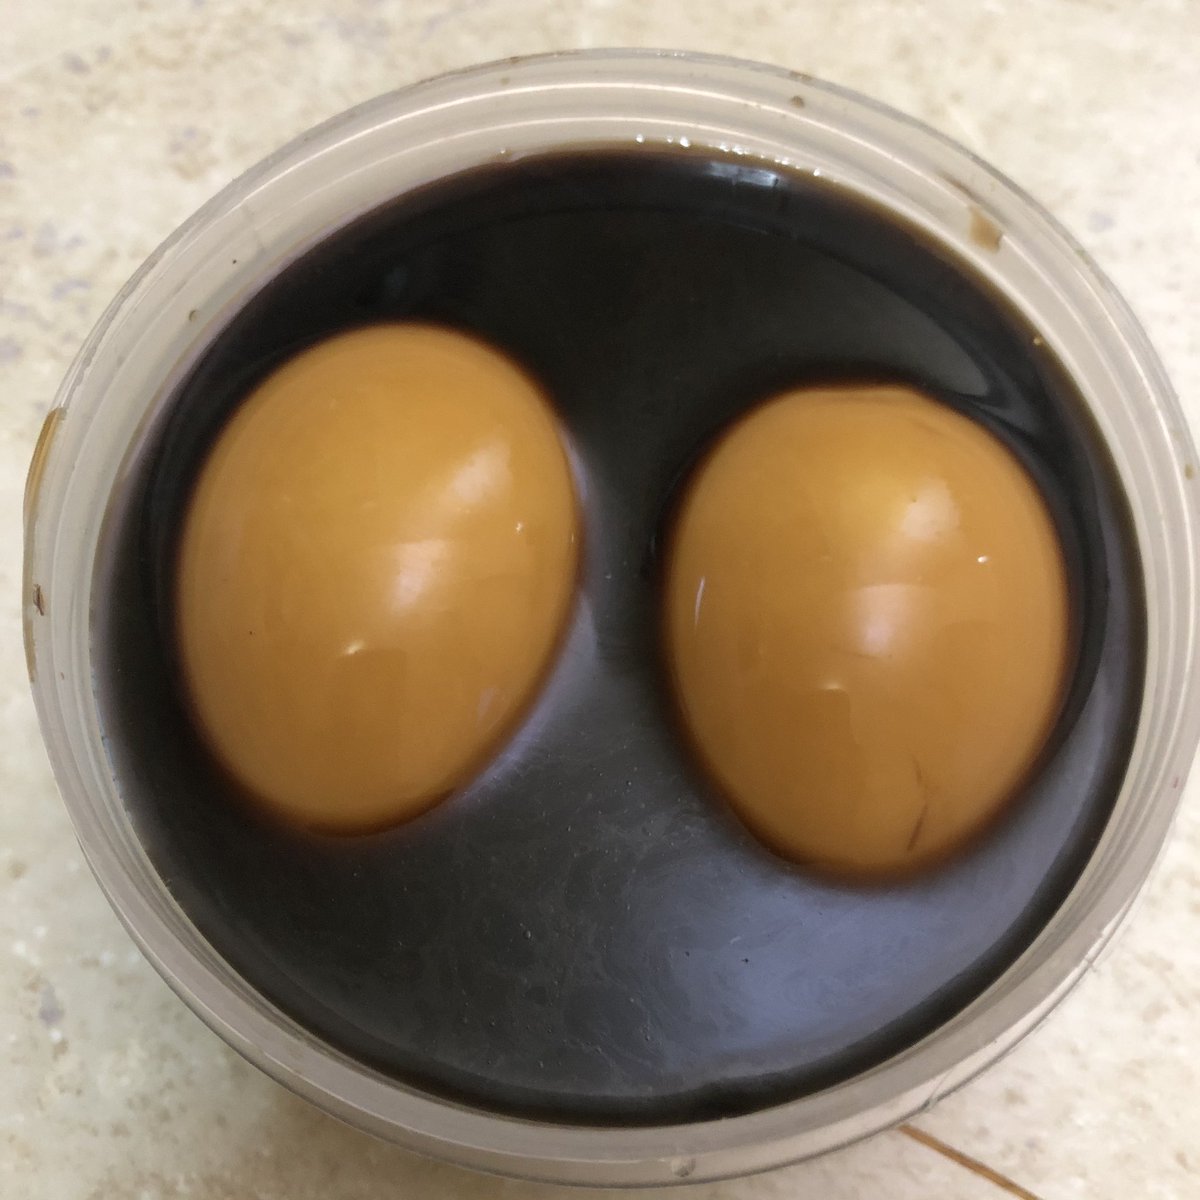 Letting my soft boiled eggs marinate in soy sauce to create Shoyu Tamago